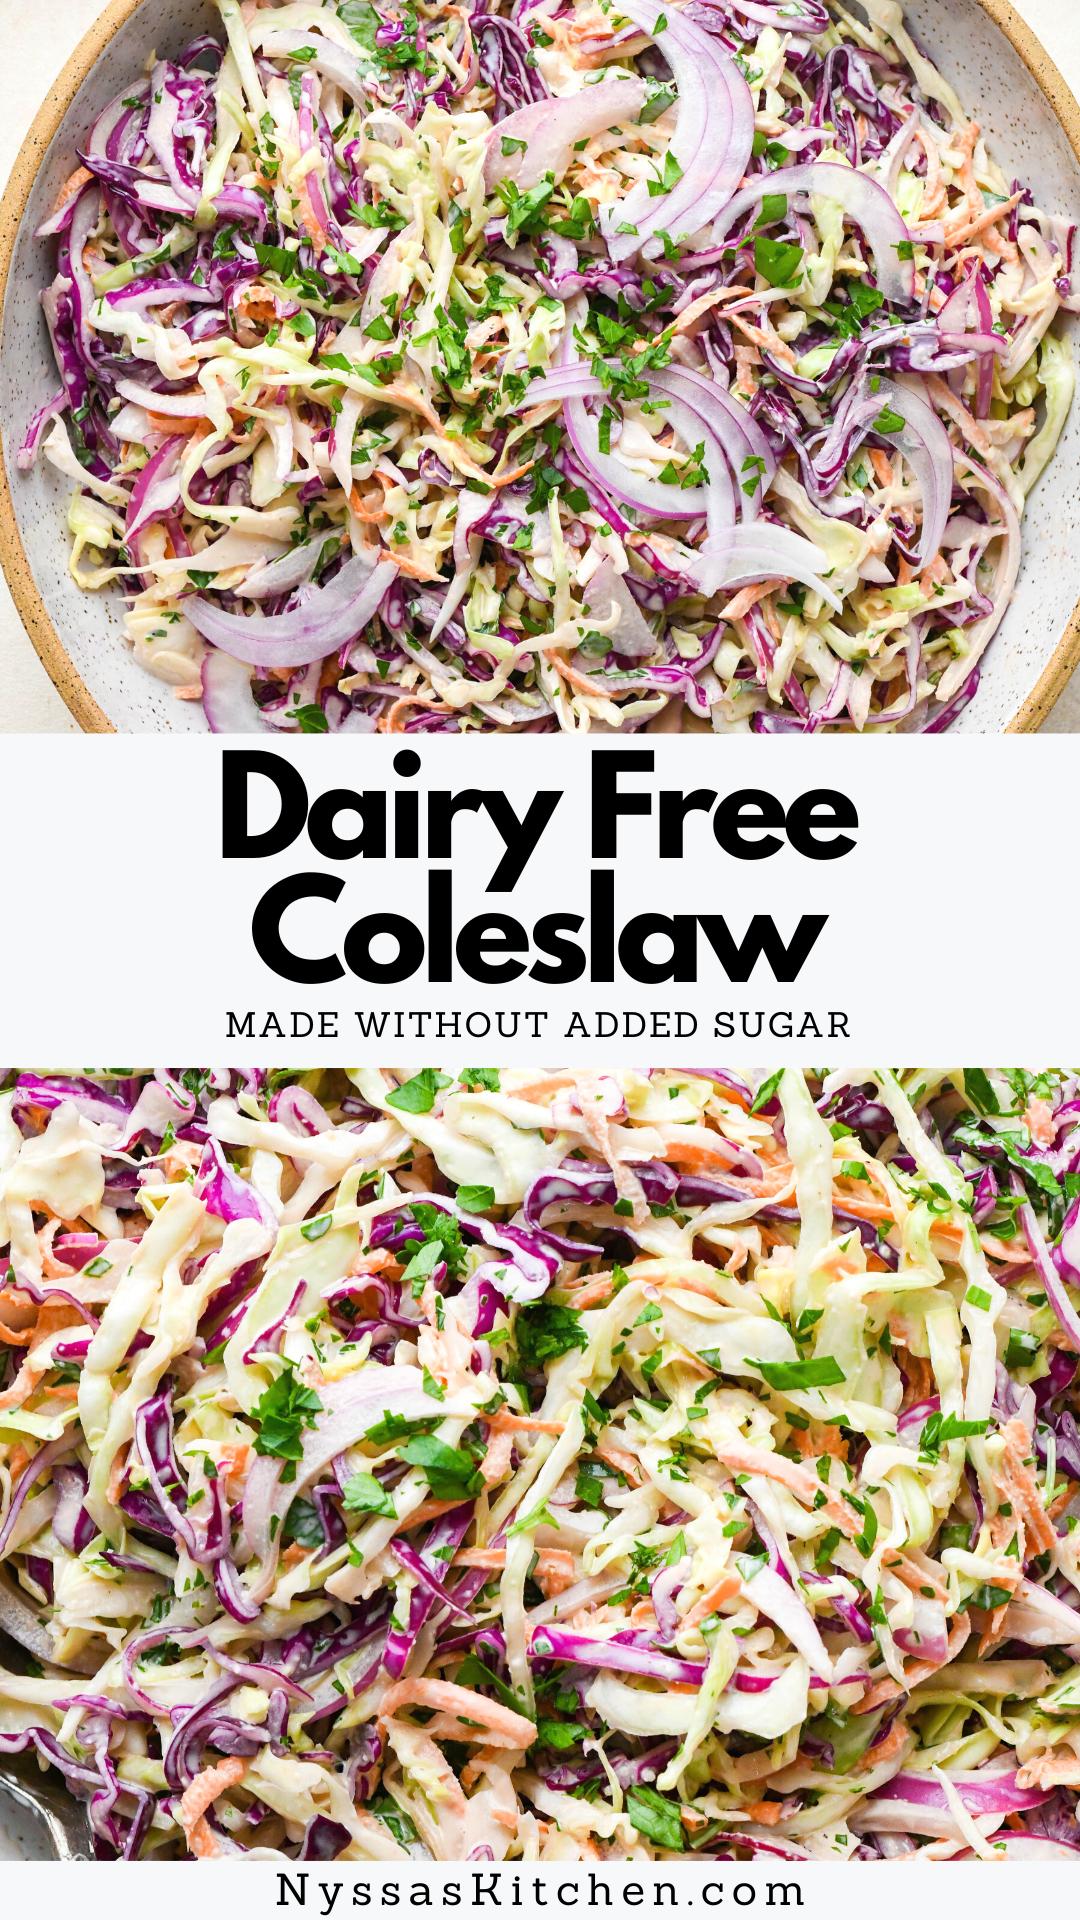 This dairy free coleslaw is made with fresh and crunchy cabbage, carrots, herbs, and a creamy, tangy mayo based dressing. All the flavors you love in a traditional coleslaw recipe without any sugar or dairy, and ready in just 20 minutes. It's the best classic side dish for your next BBQ, potluck, or family dinner! And no sugar in the dressing means this recipe is Whole30 compatible and lower in carbs for a keto friendly option.